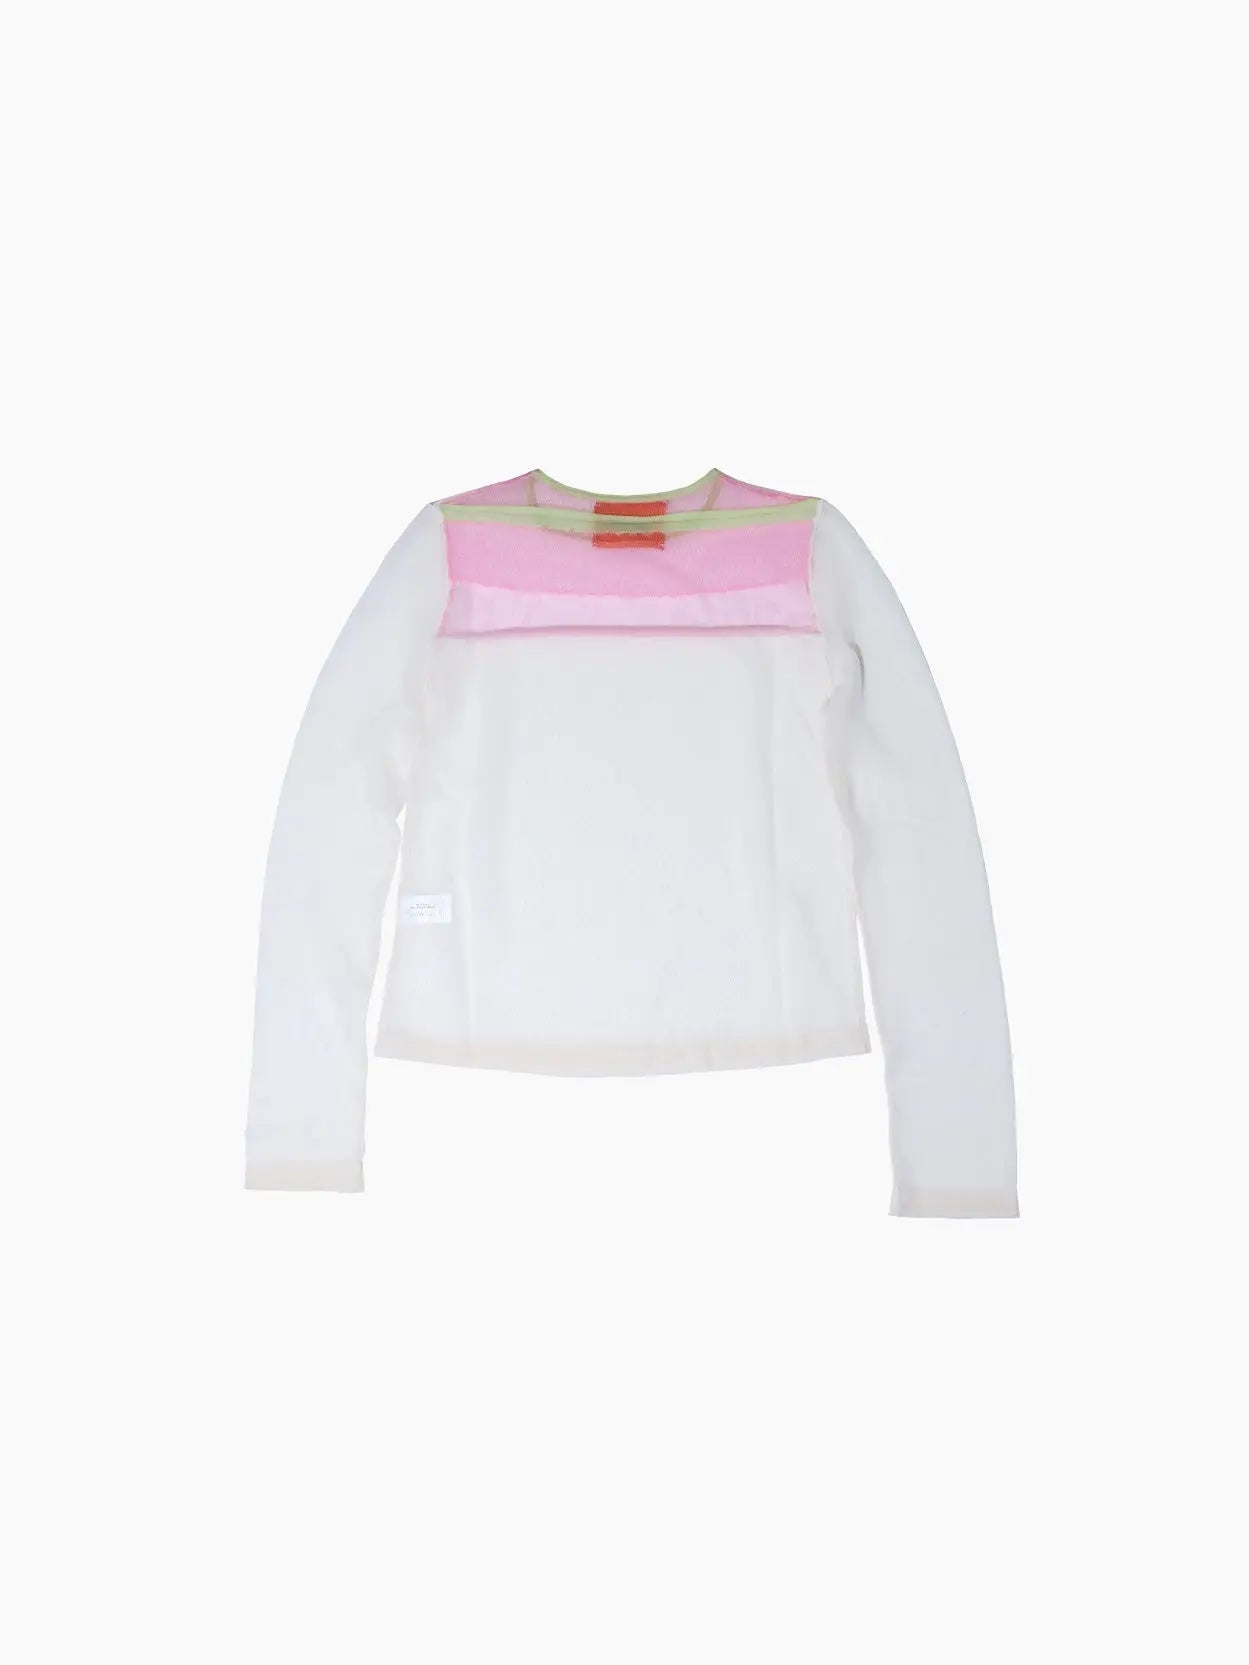 A long-sleeve, white, semi-sheer top with pink and light green accents around the neckline and chest area. The neckline features a small orange label with black text. This minimalist design exudes casual style—perfect for a day out in Barcelona or browsing your favorite store. The Bari Sweater Ecru by Bielo is an ideal choice for such versatile occasions.